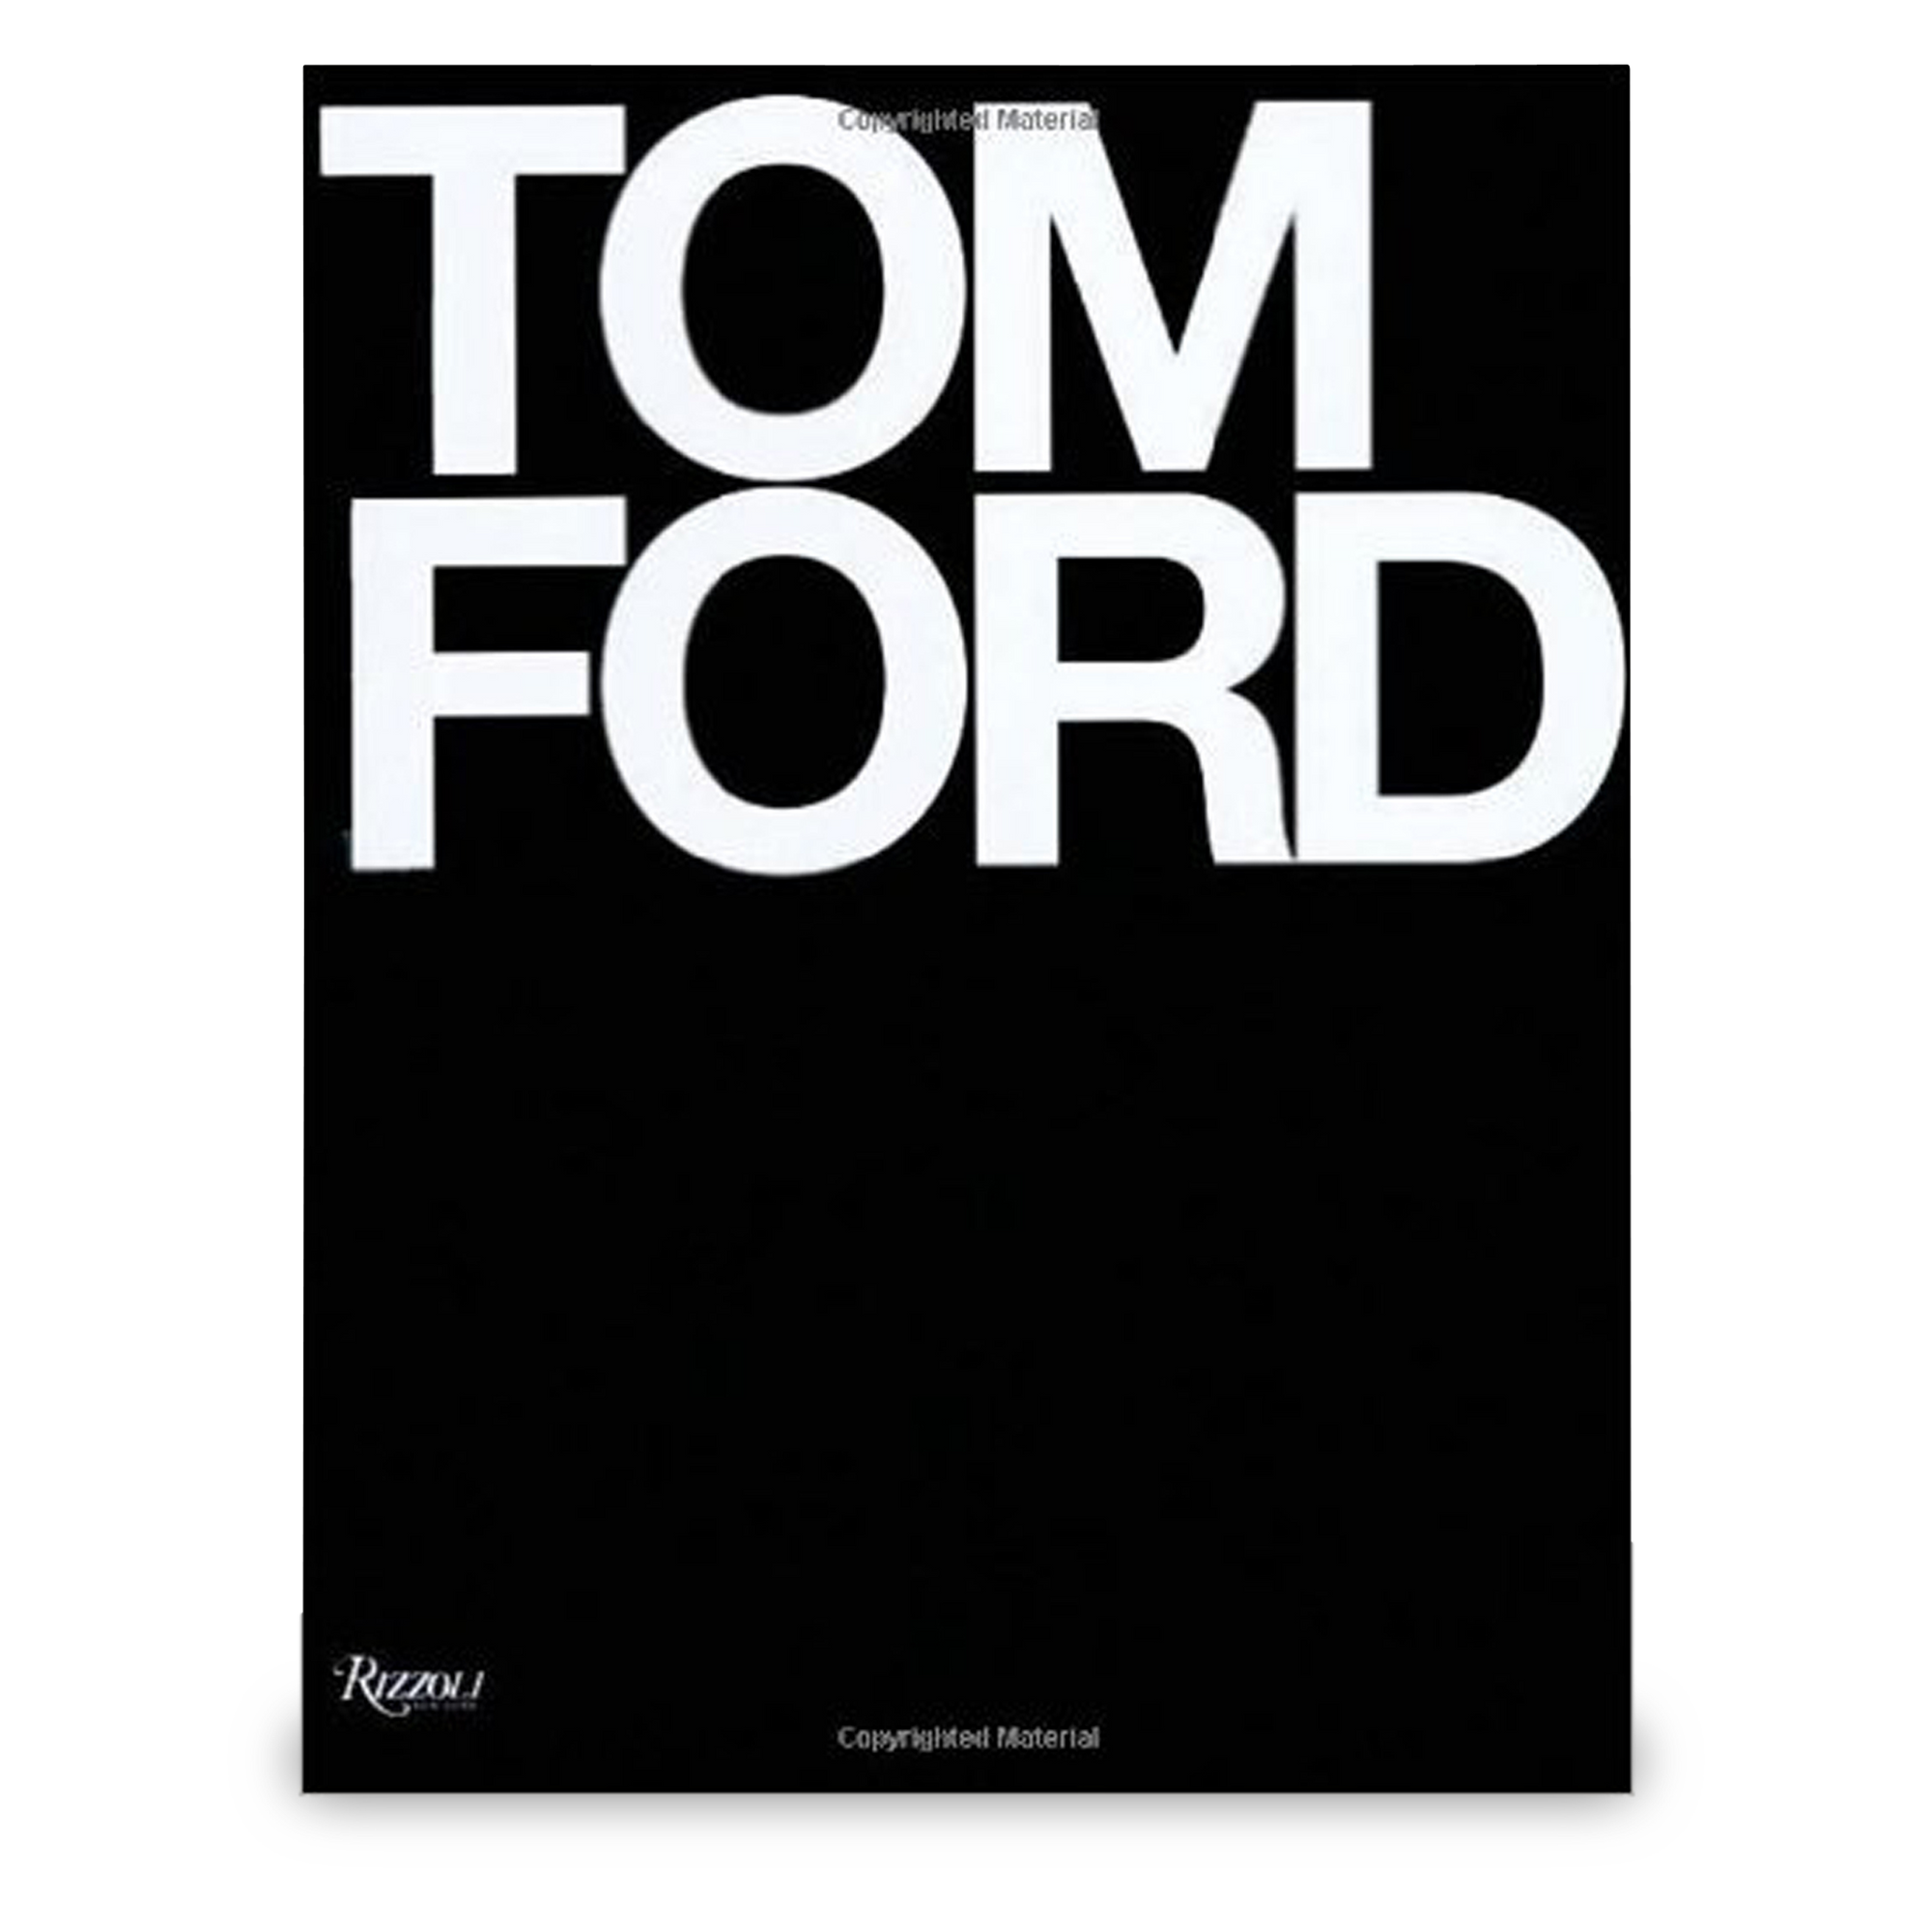 This book is a complete catalogue of Ford's design work for both Gucci and Yves Saint Laurent from 1994 to 2004.